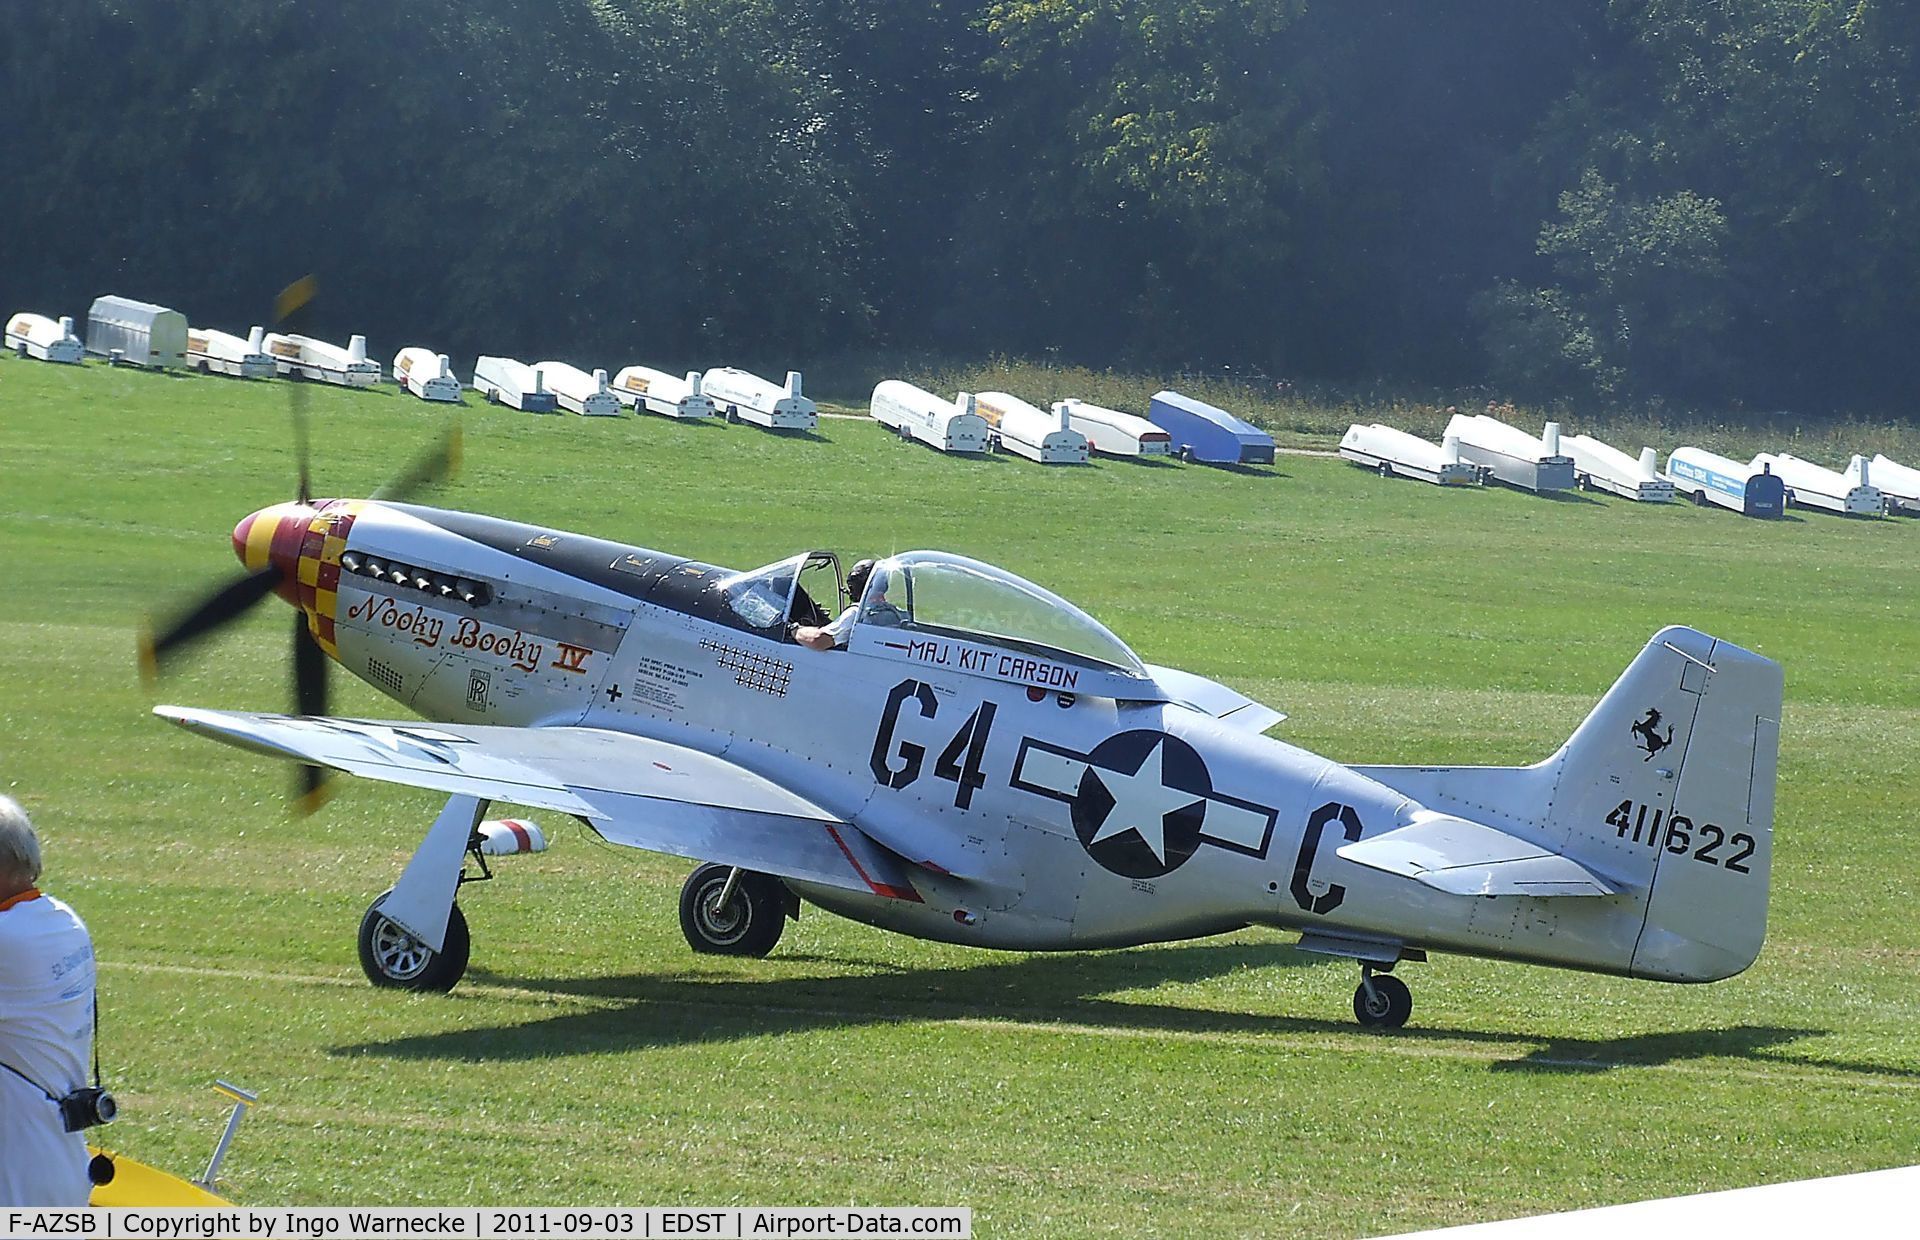 F-AZSB, 1944 North American P-51D Mustang C/N 122-40967, North American P-51D Mustang at the 2011 Hahnweide Fly-in, Kirchheim unter Teck airfield